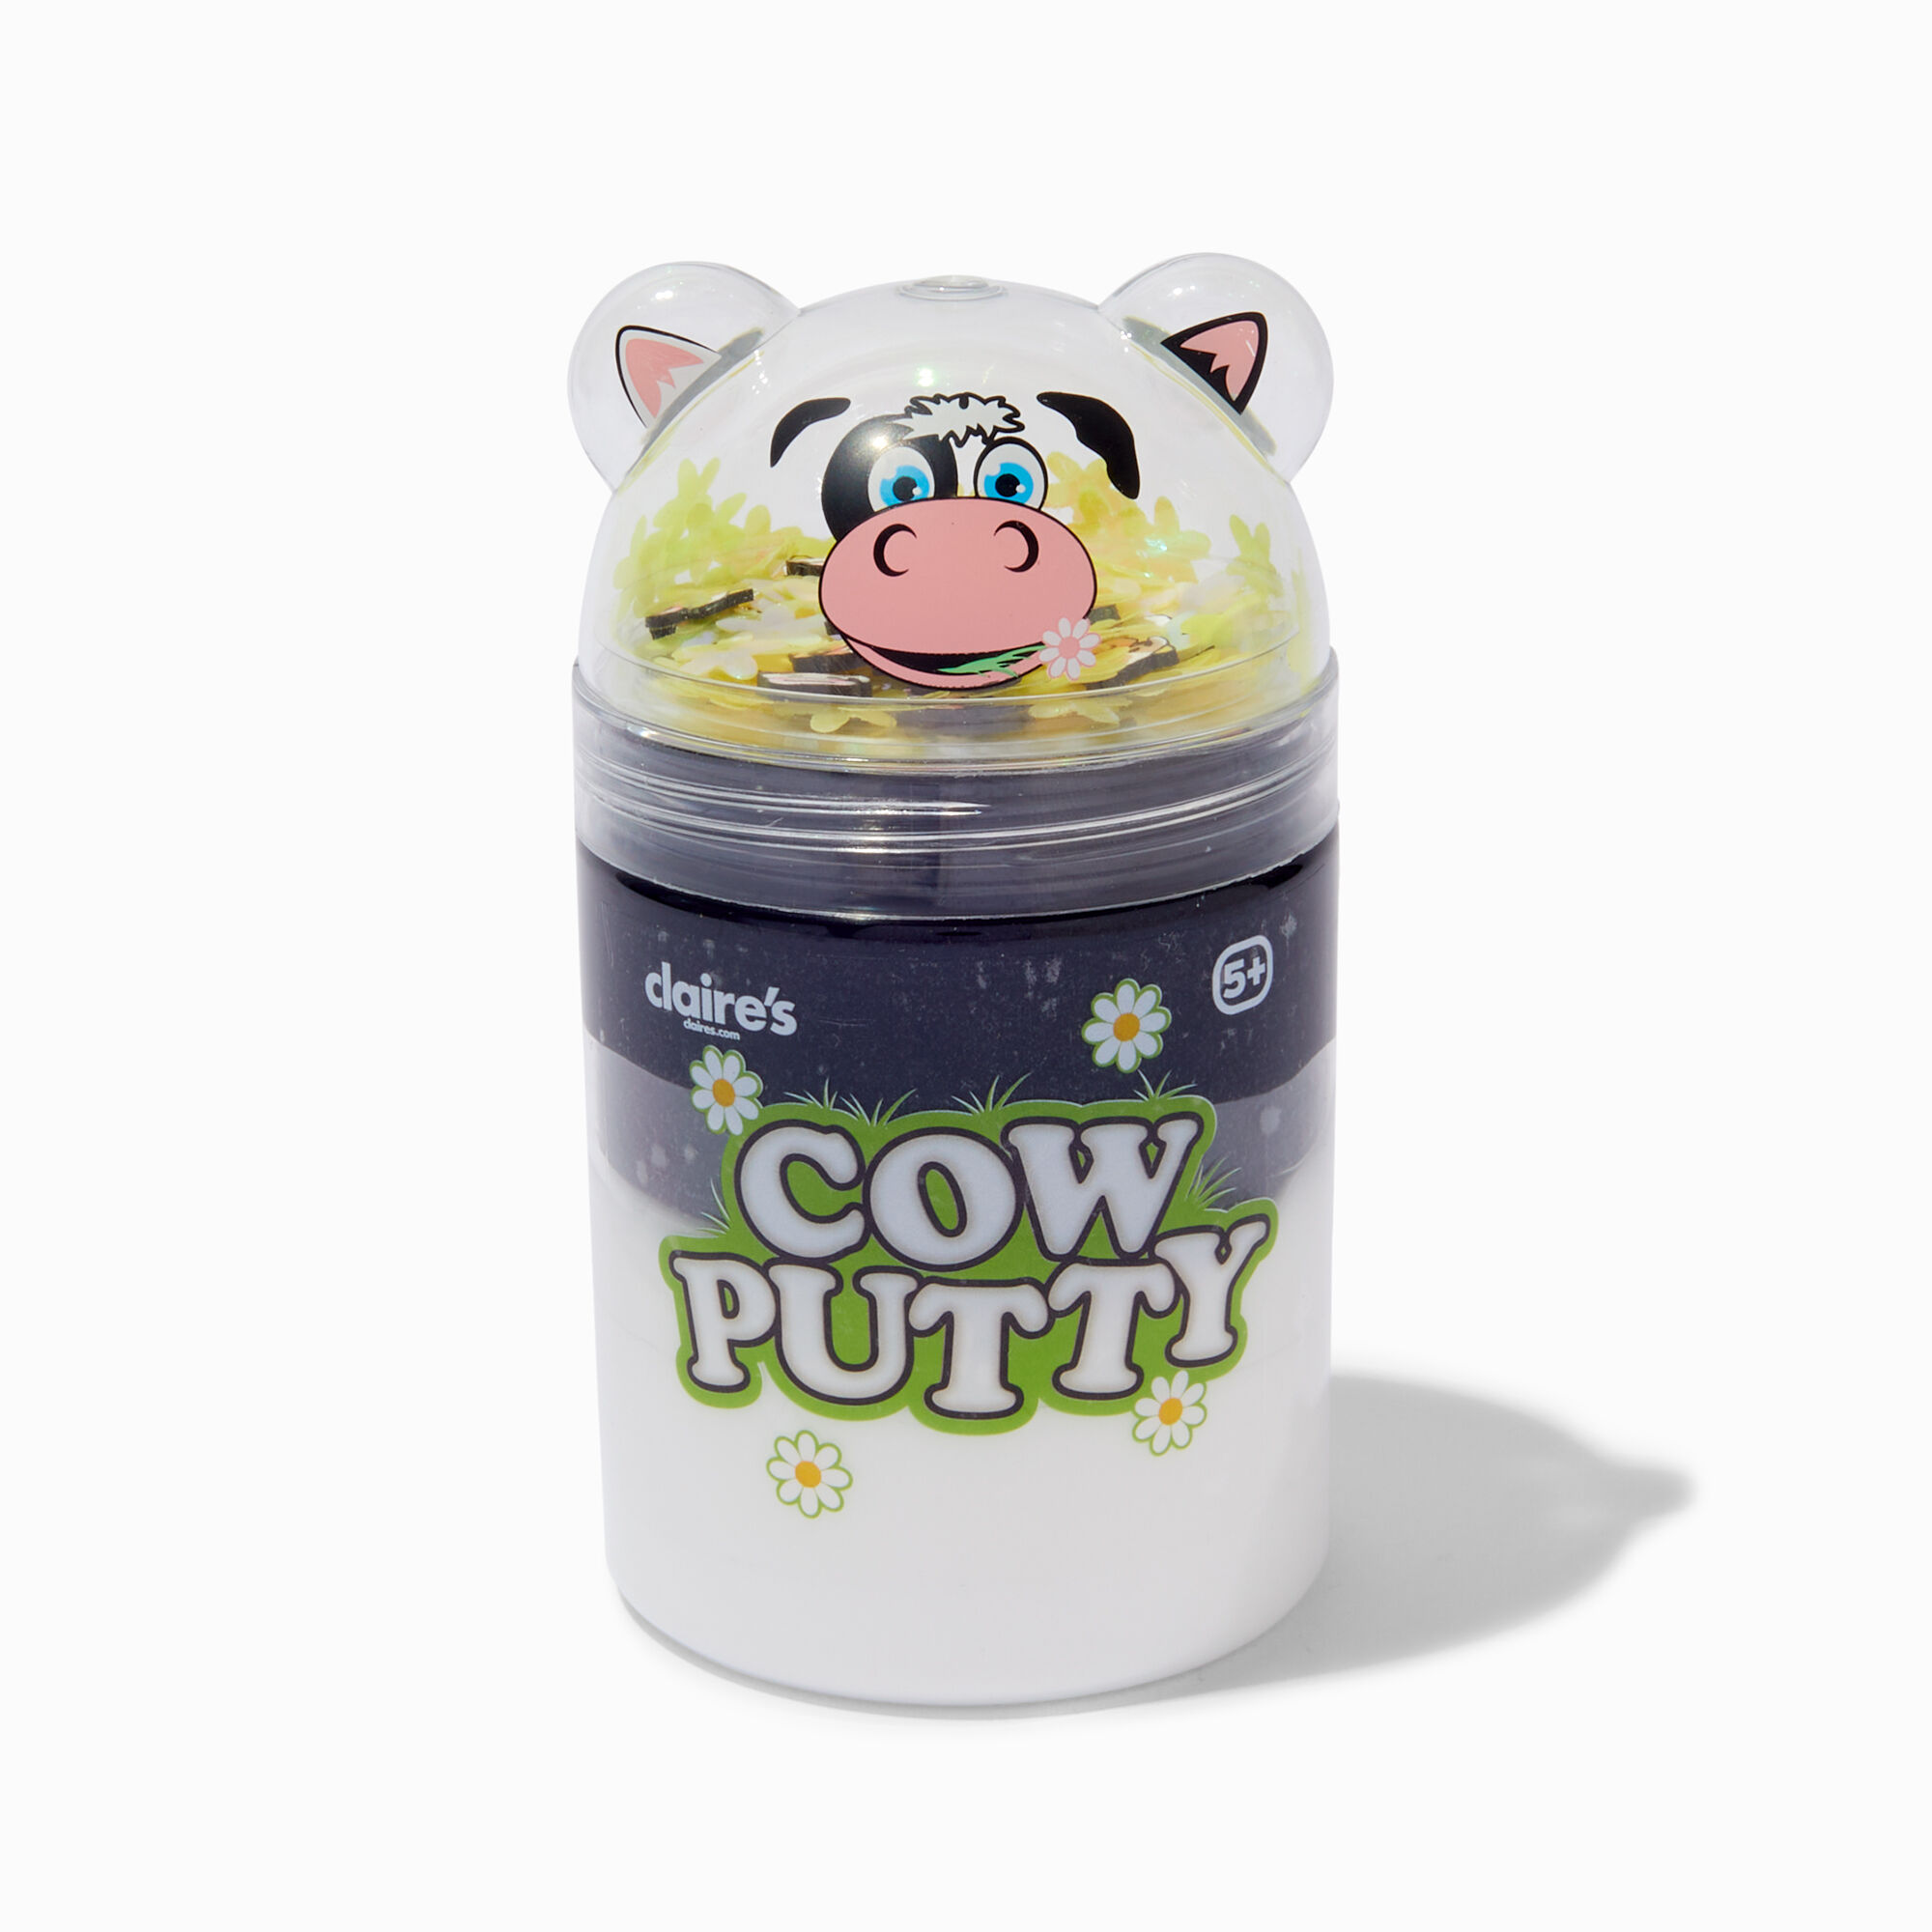 View Black Cow Claires Exclusive Putty Pot White information